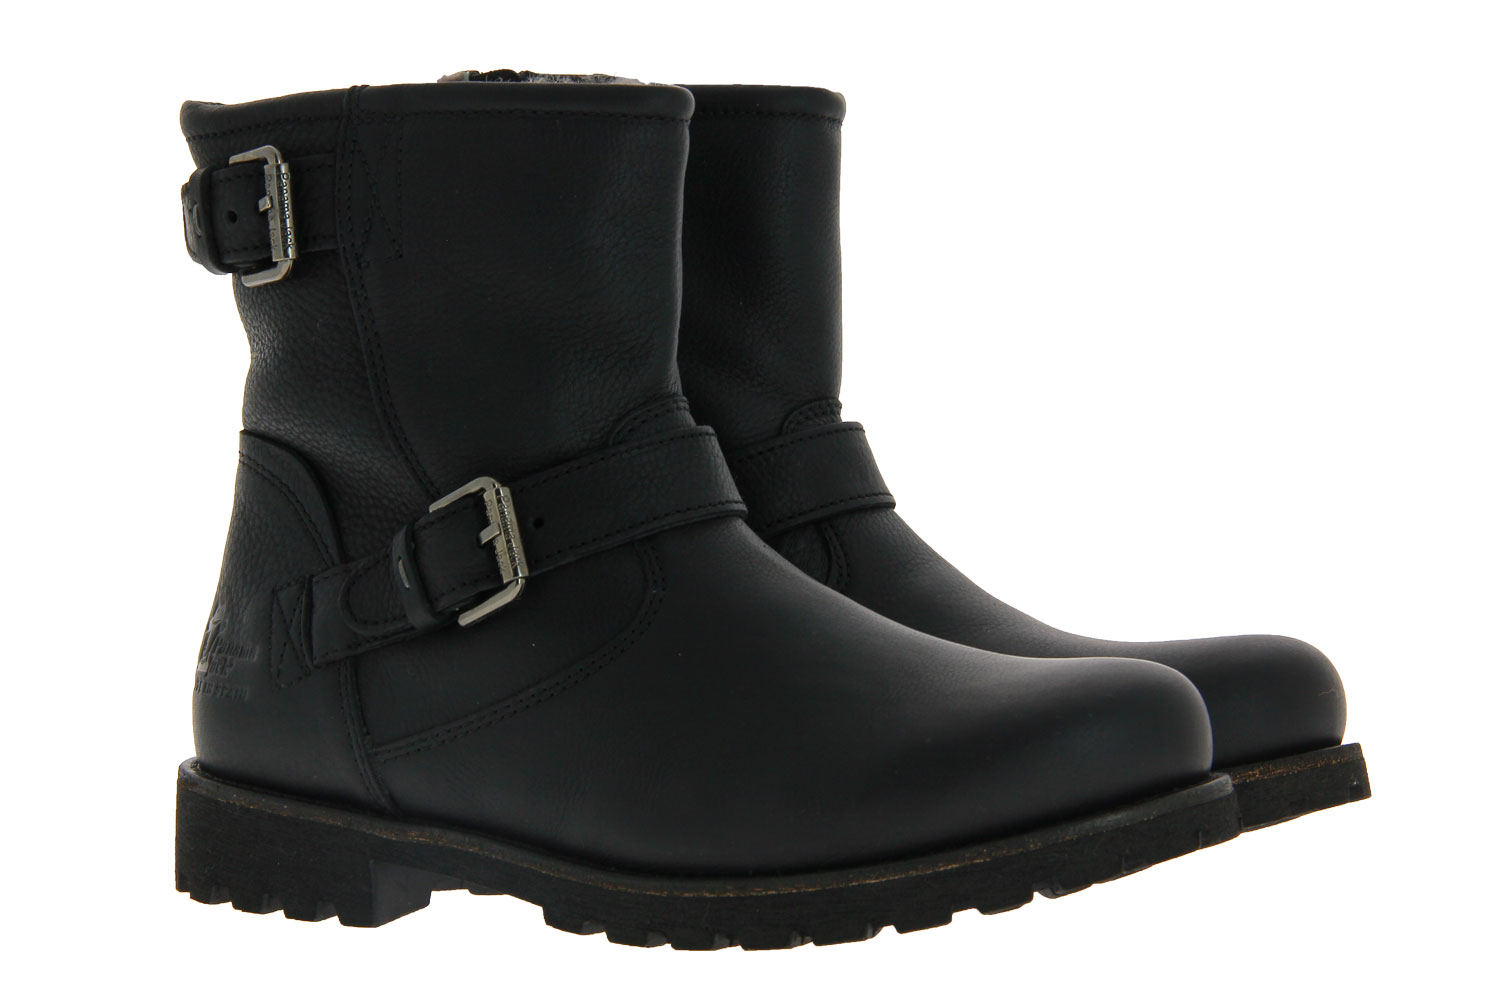 Vervuild Toeval Vriendin Panama Jack ankle boots lined FAUST IGLOO NAPA GRASS NEGRO